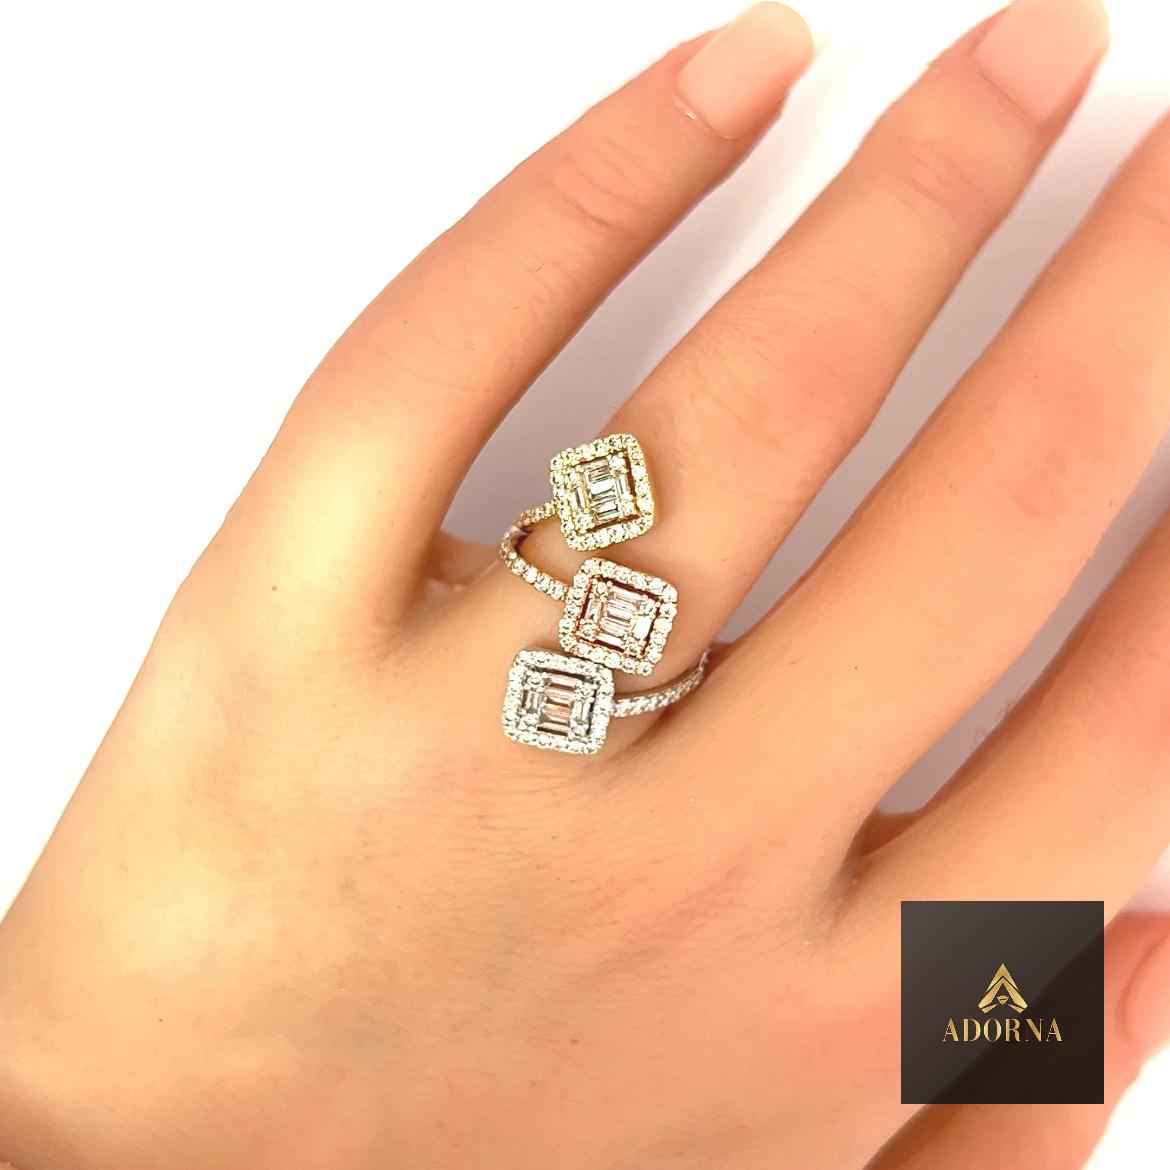 Embrace the allure of this exquisite jewelry piece, meticulously crafted in 14K yellow gold with a radiant white rhodium finish. Designed to fit size 6, it features a dazzling array of 114 diamonds, boasting a total carat weight of 1.52. Every